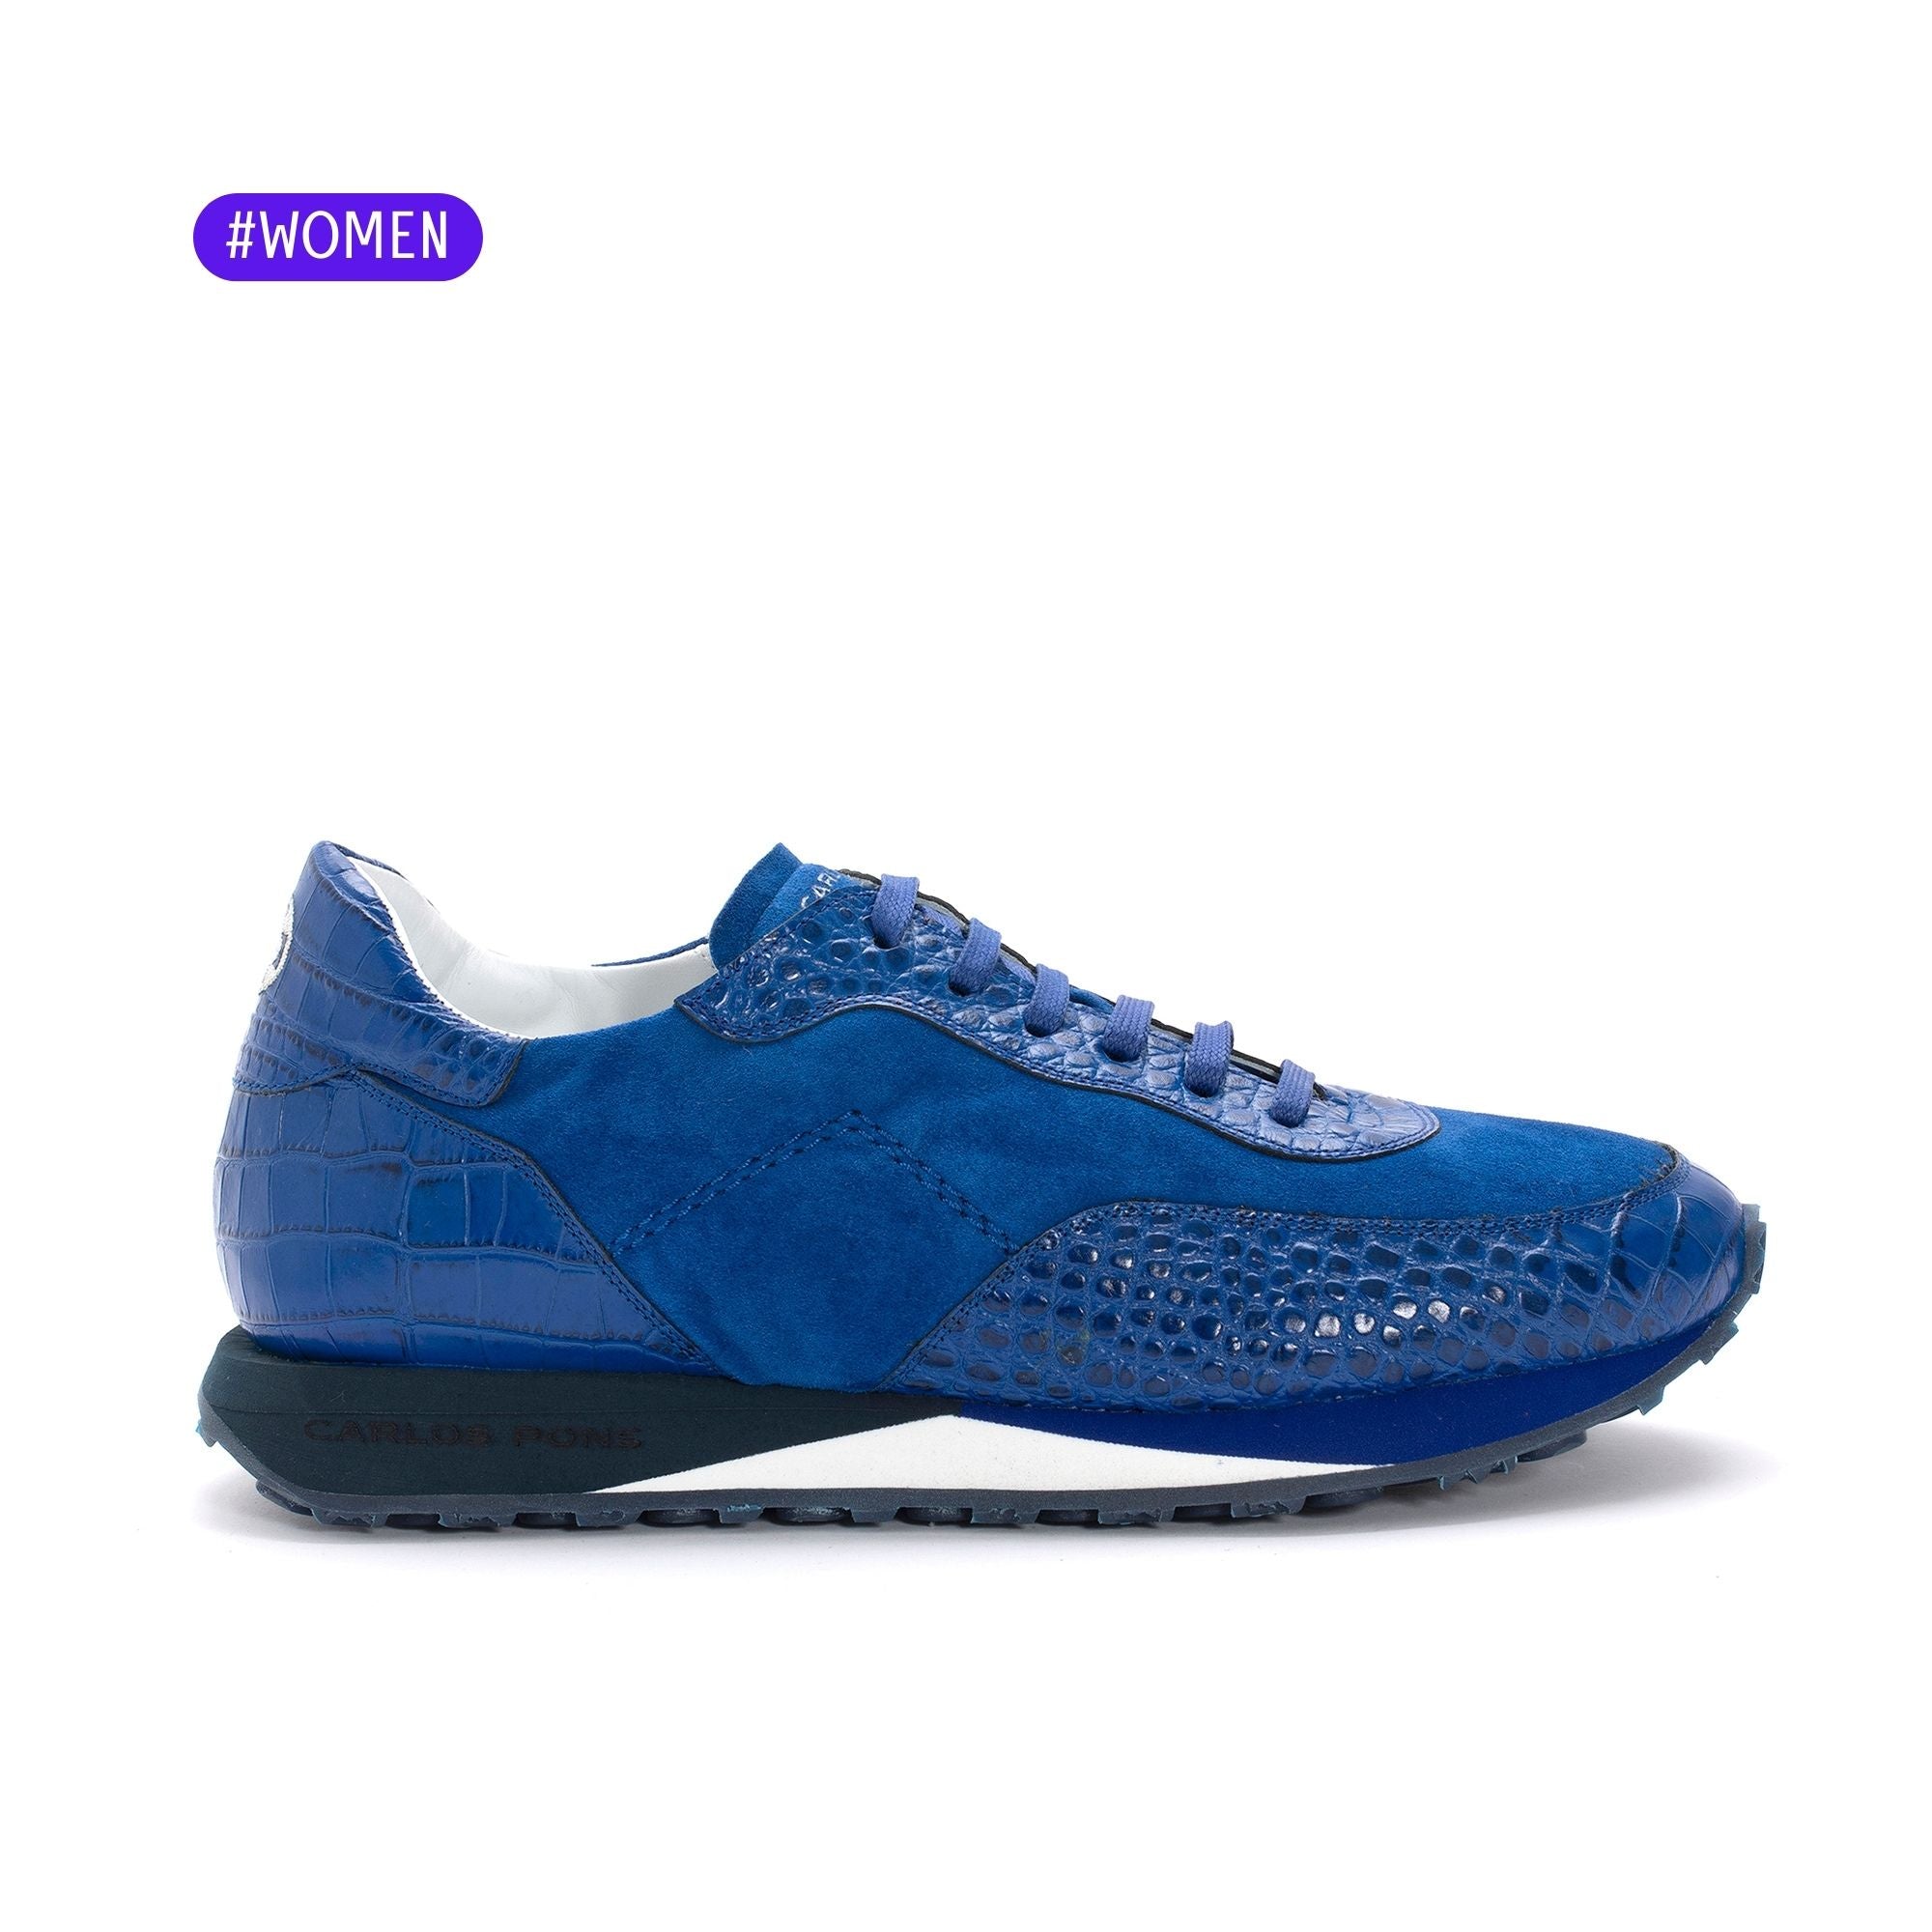 SNEAKER RUNNER COCCO ELECTRIC